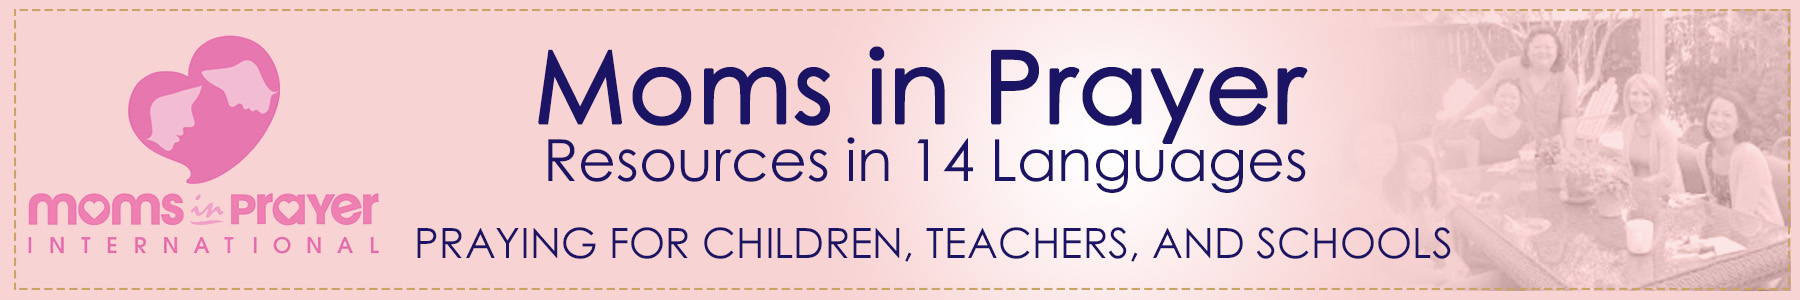 Moms in Prayer Resources in 14 Languages - Praying for Children, Teachers and Schools 